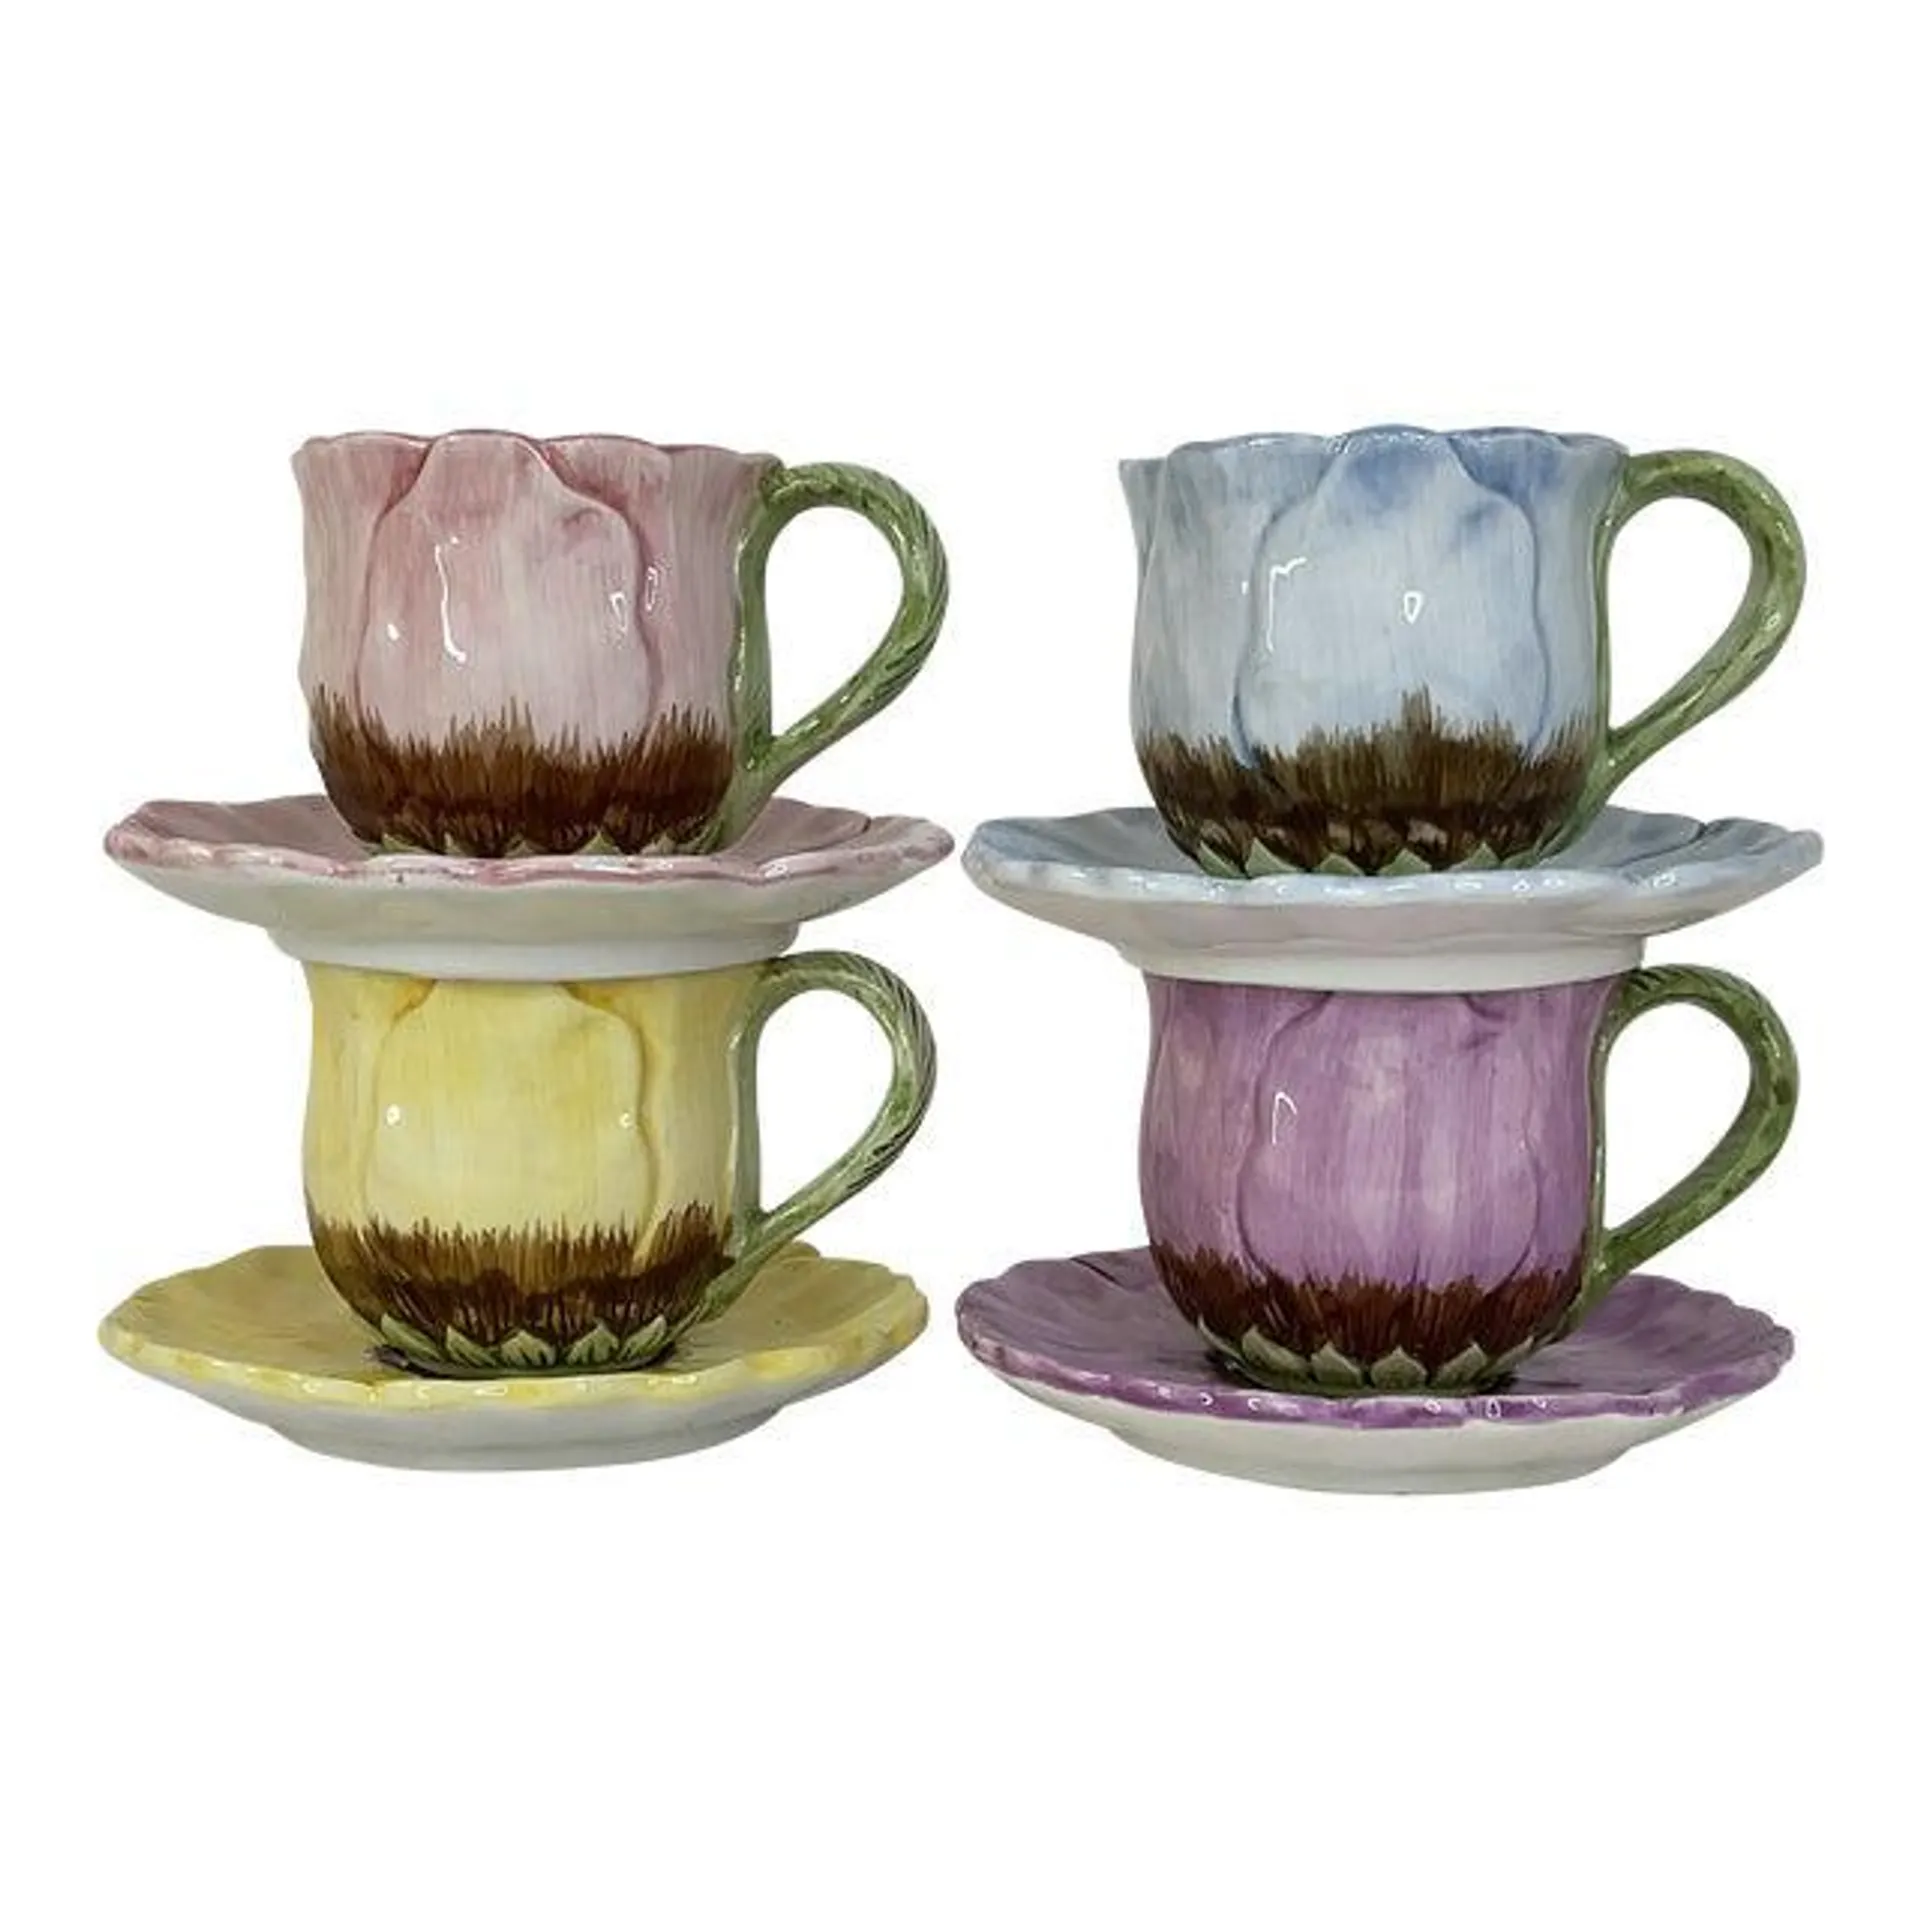 1980s Vintage Hand Painted Pansy Tea Cups and Saucers Set- 8 Pieces.